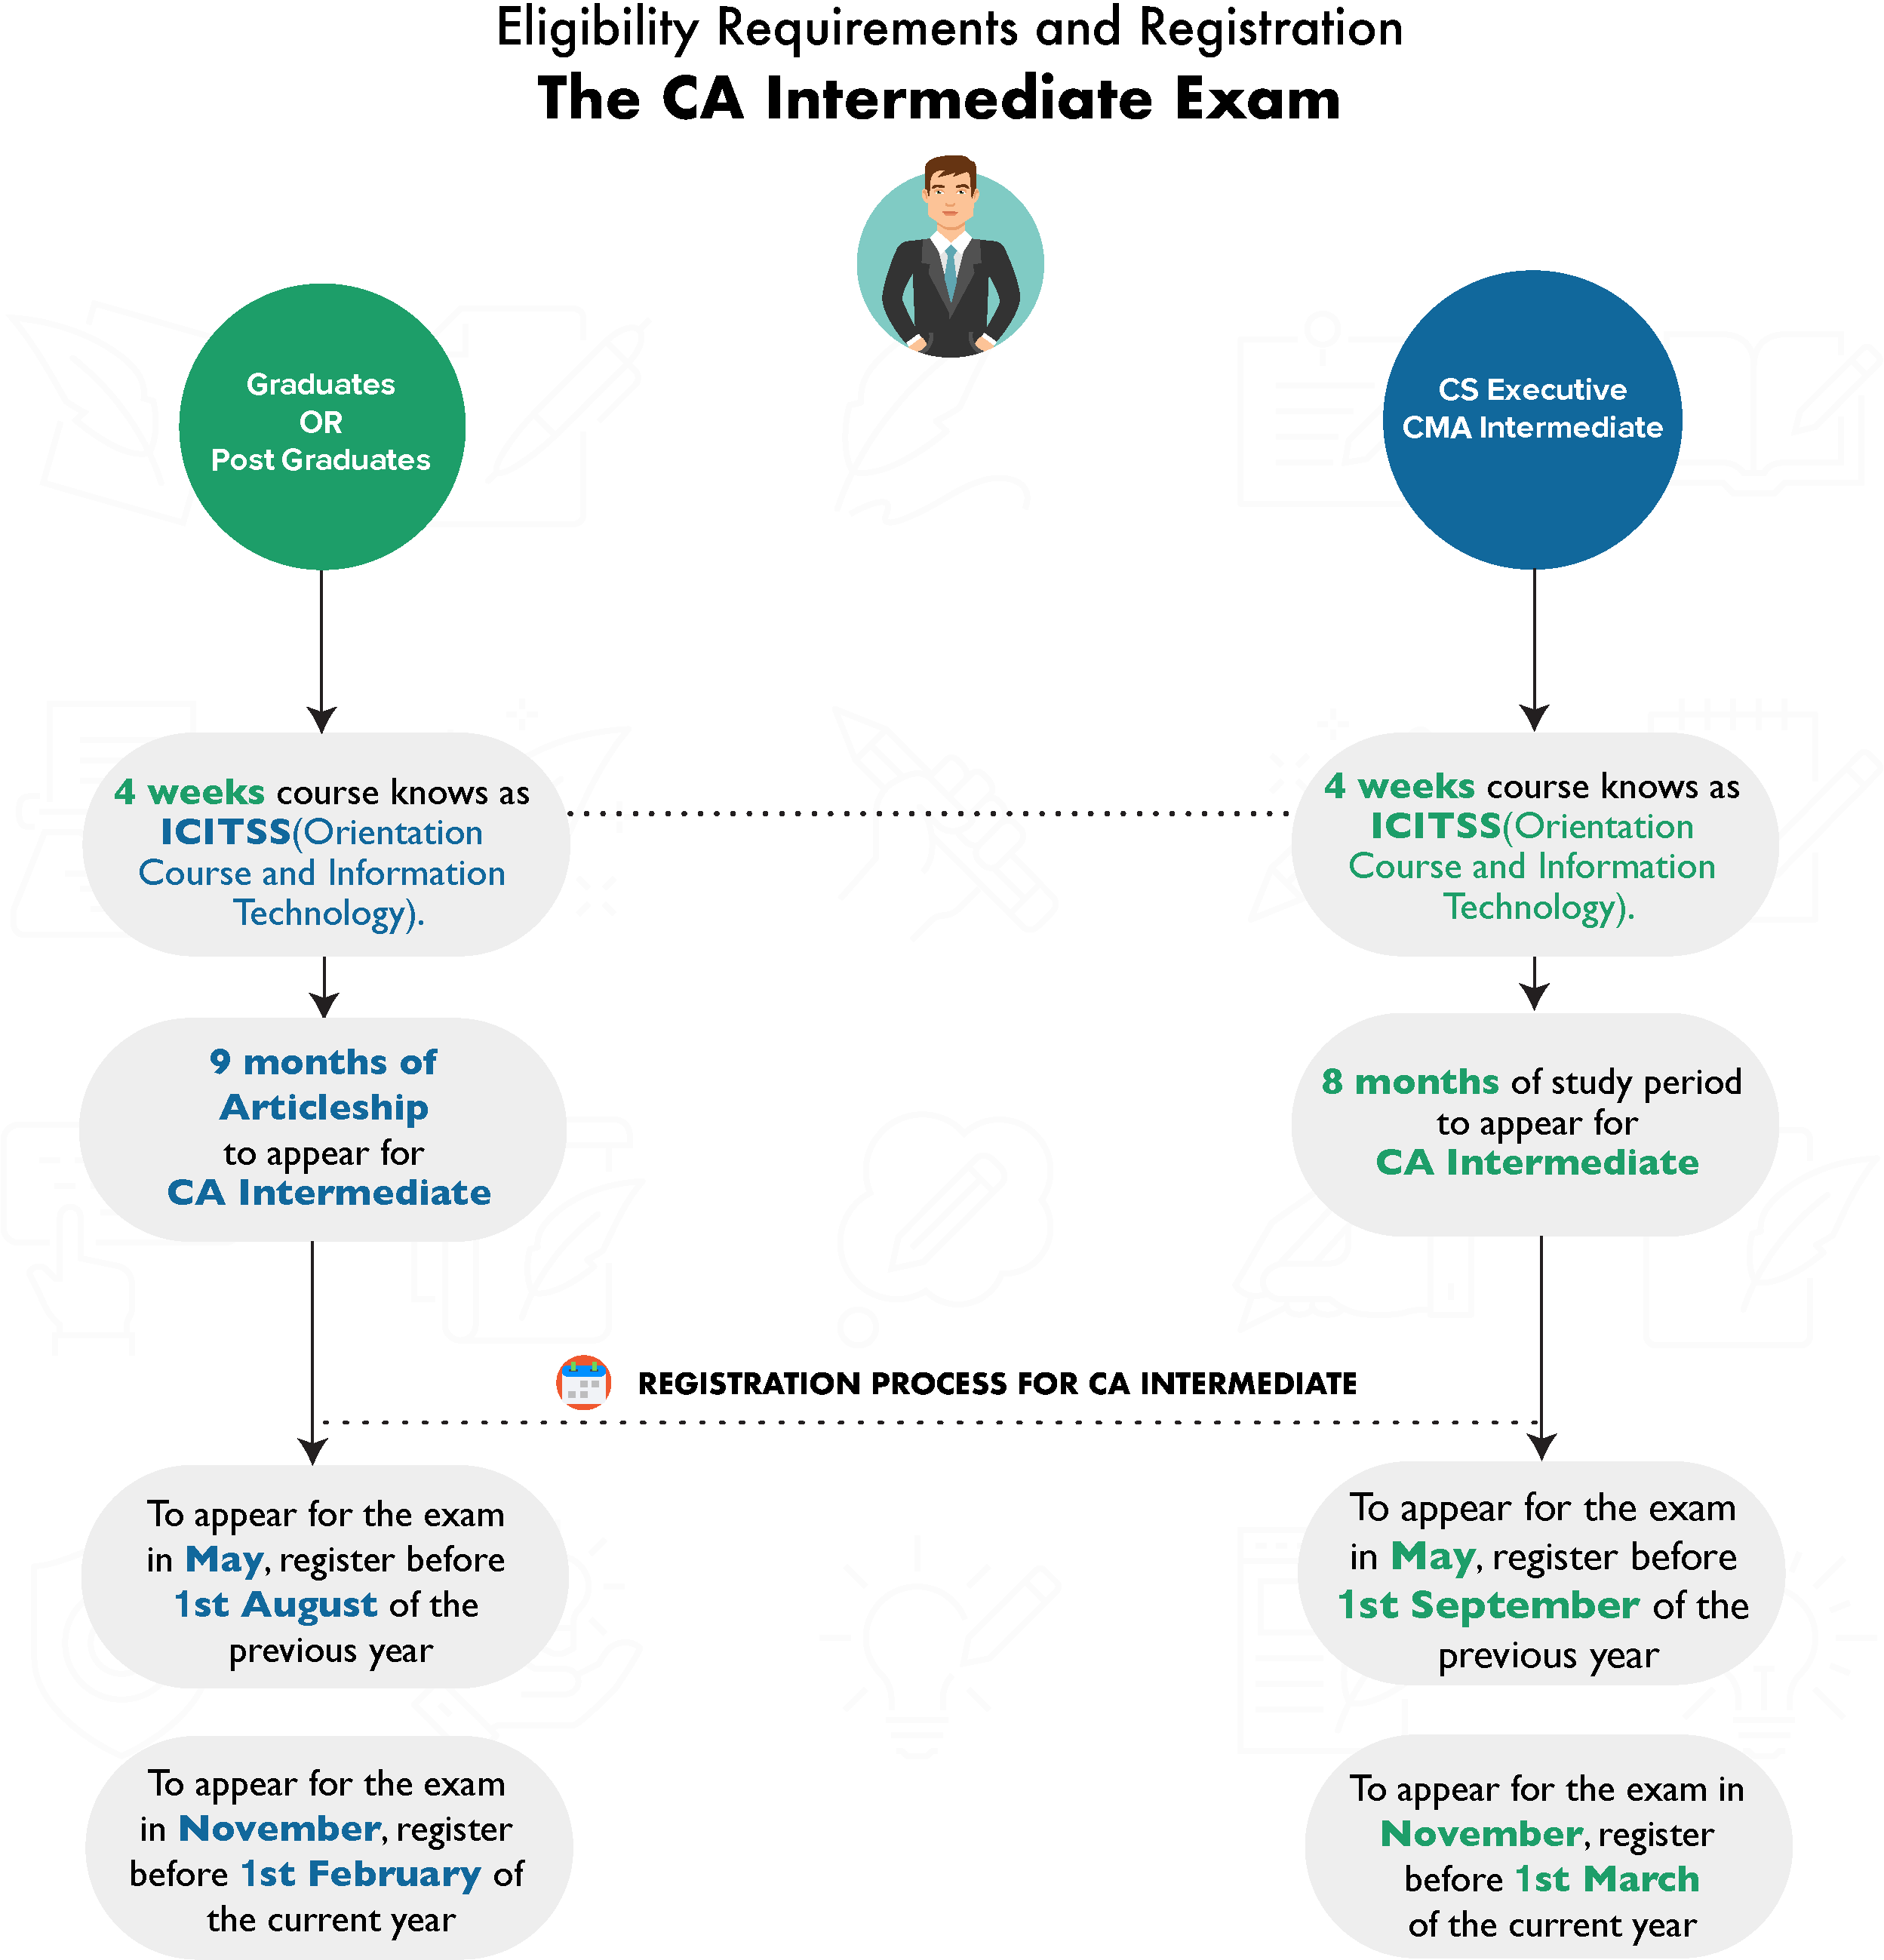 Eligibility Requirements and Registration: CA Intermediate Exam